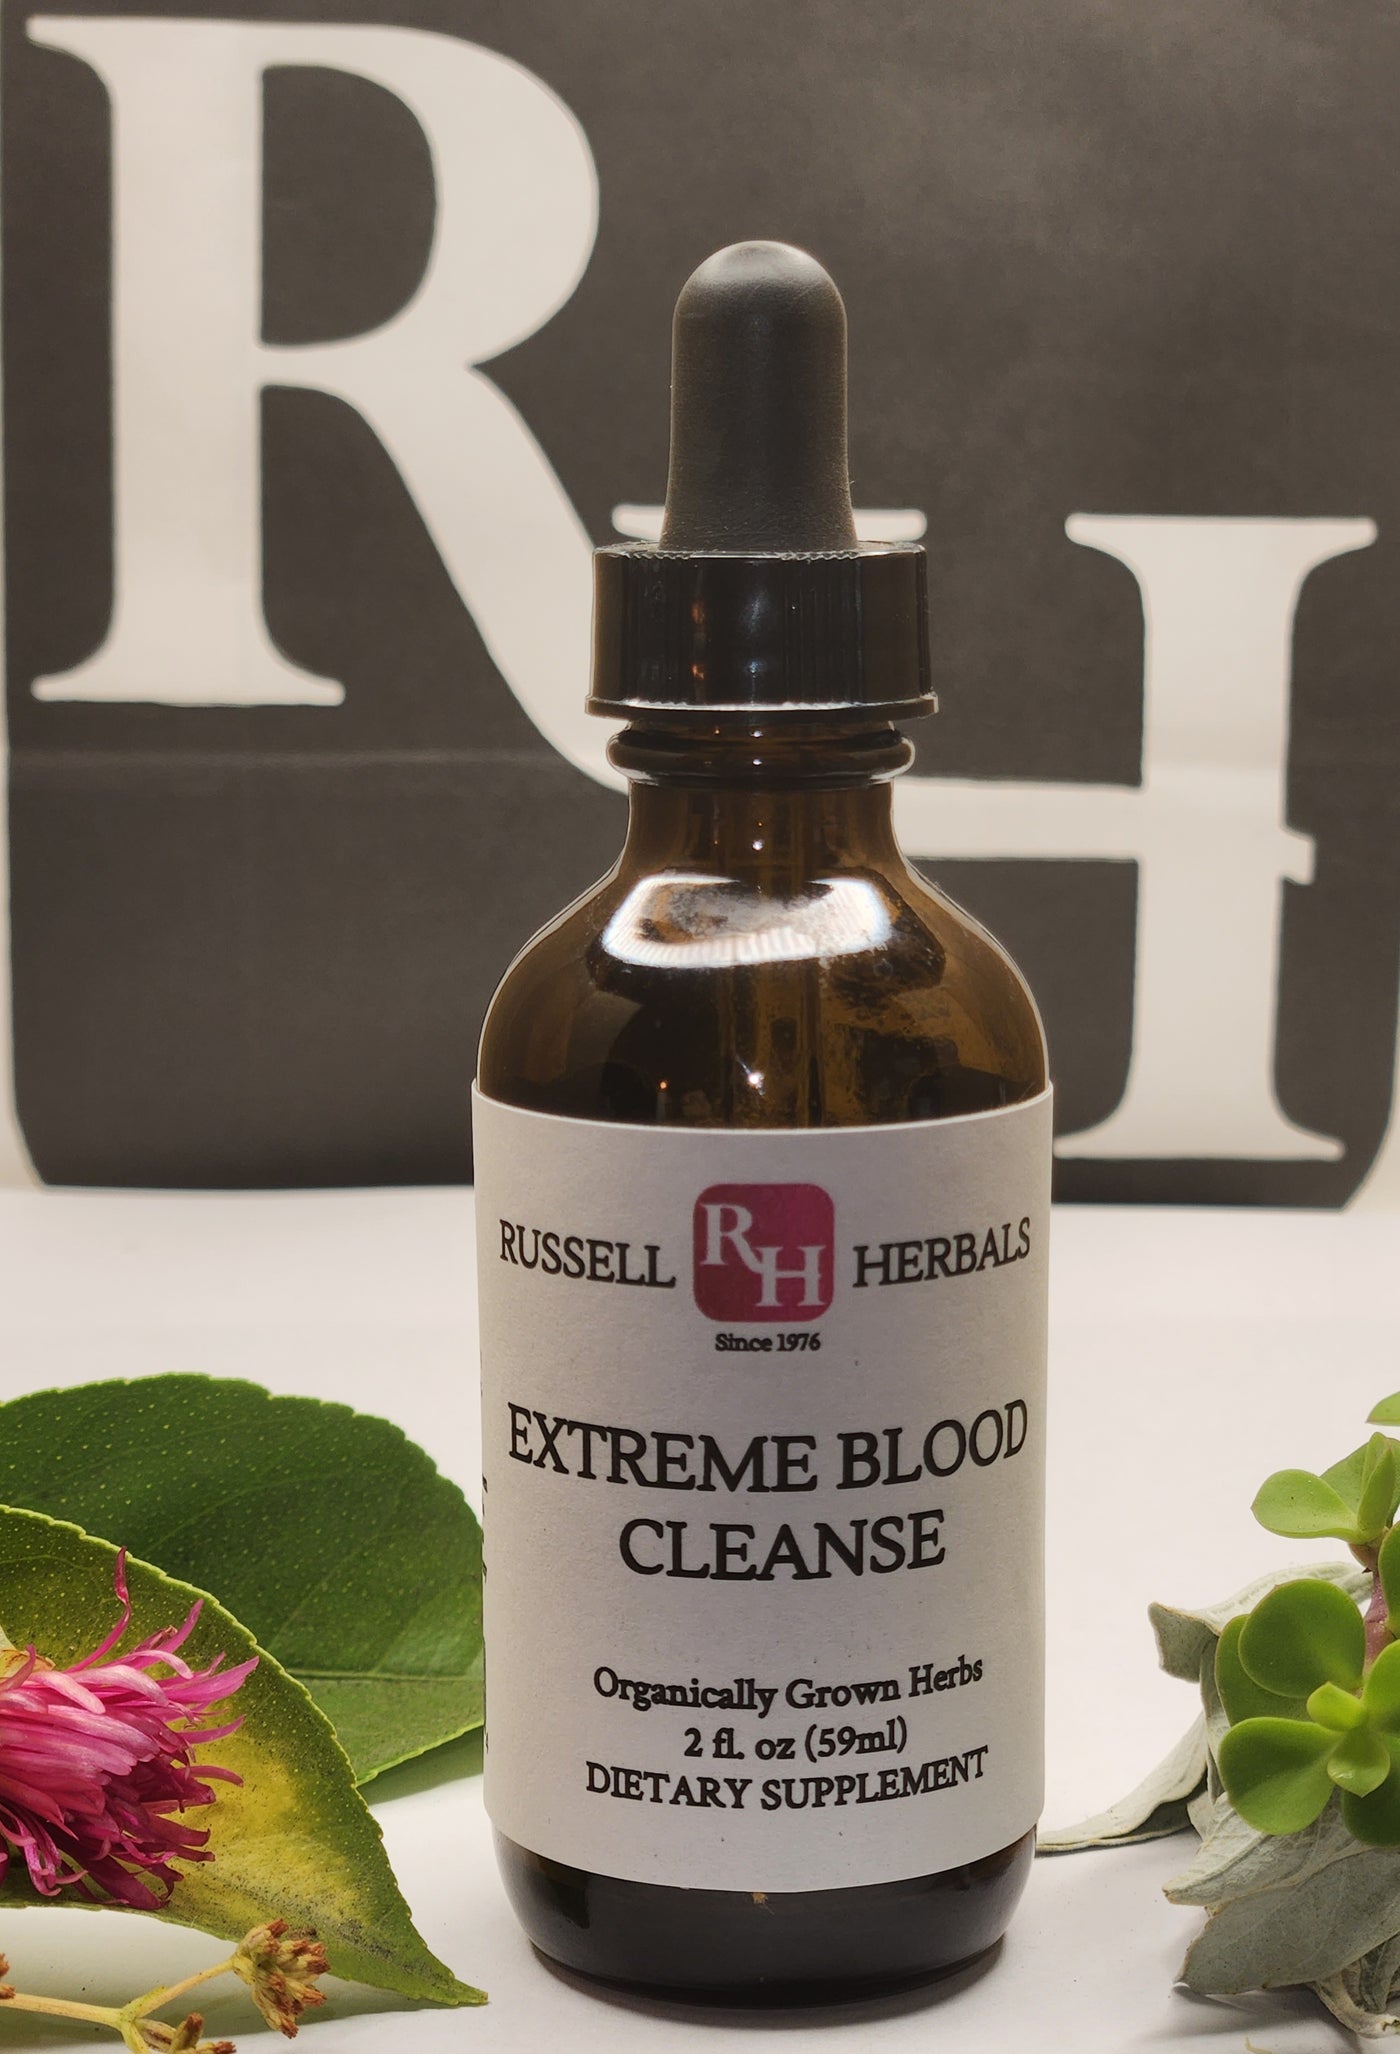 Extreme Blood Cleanse